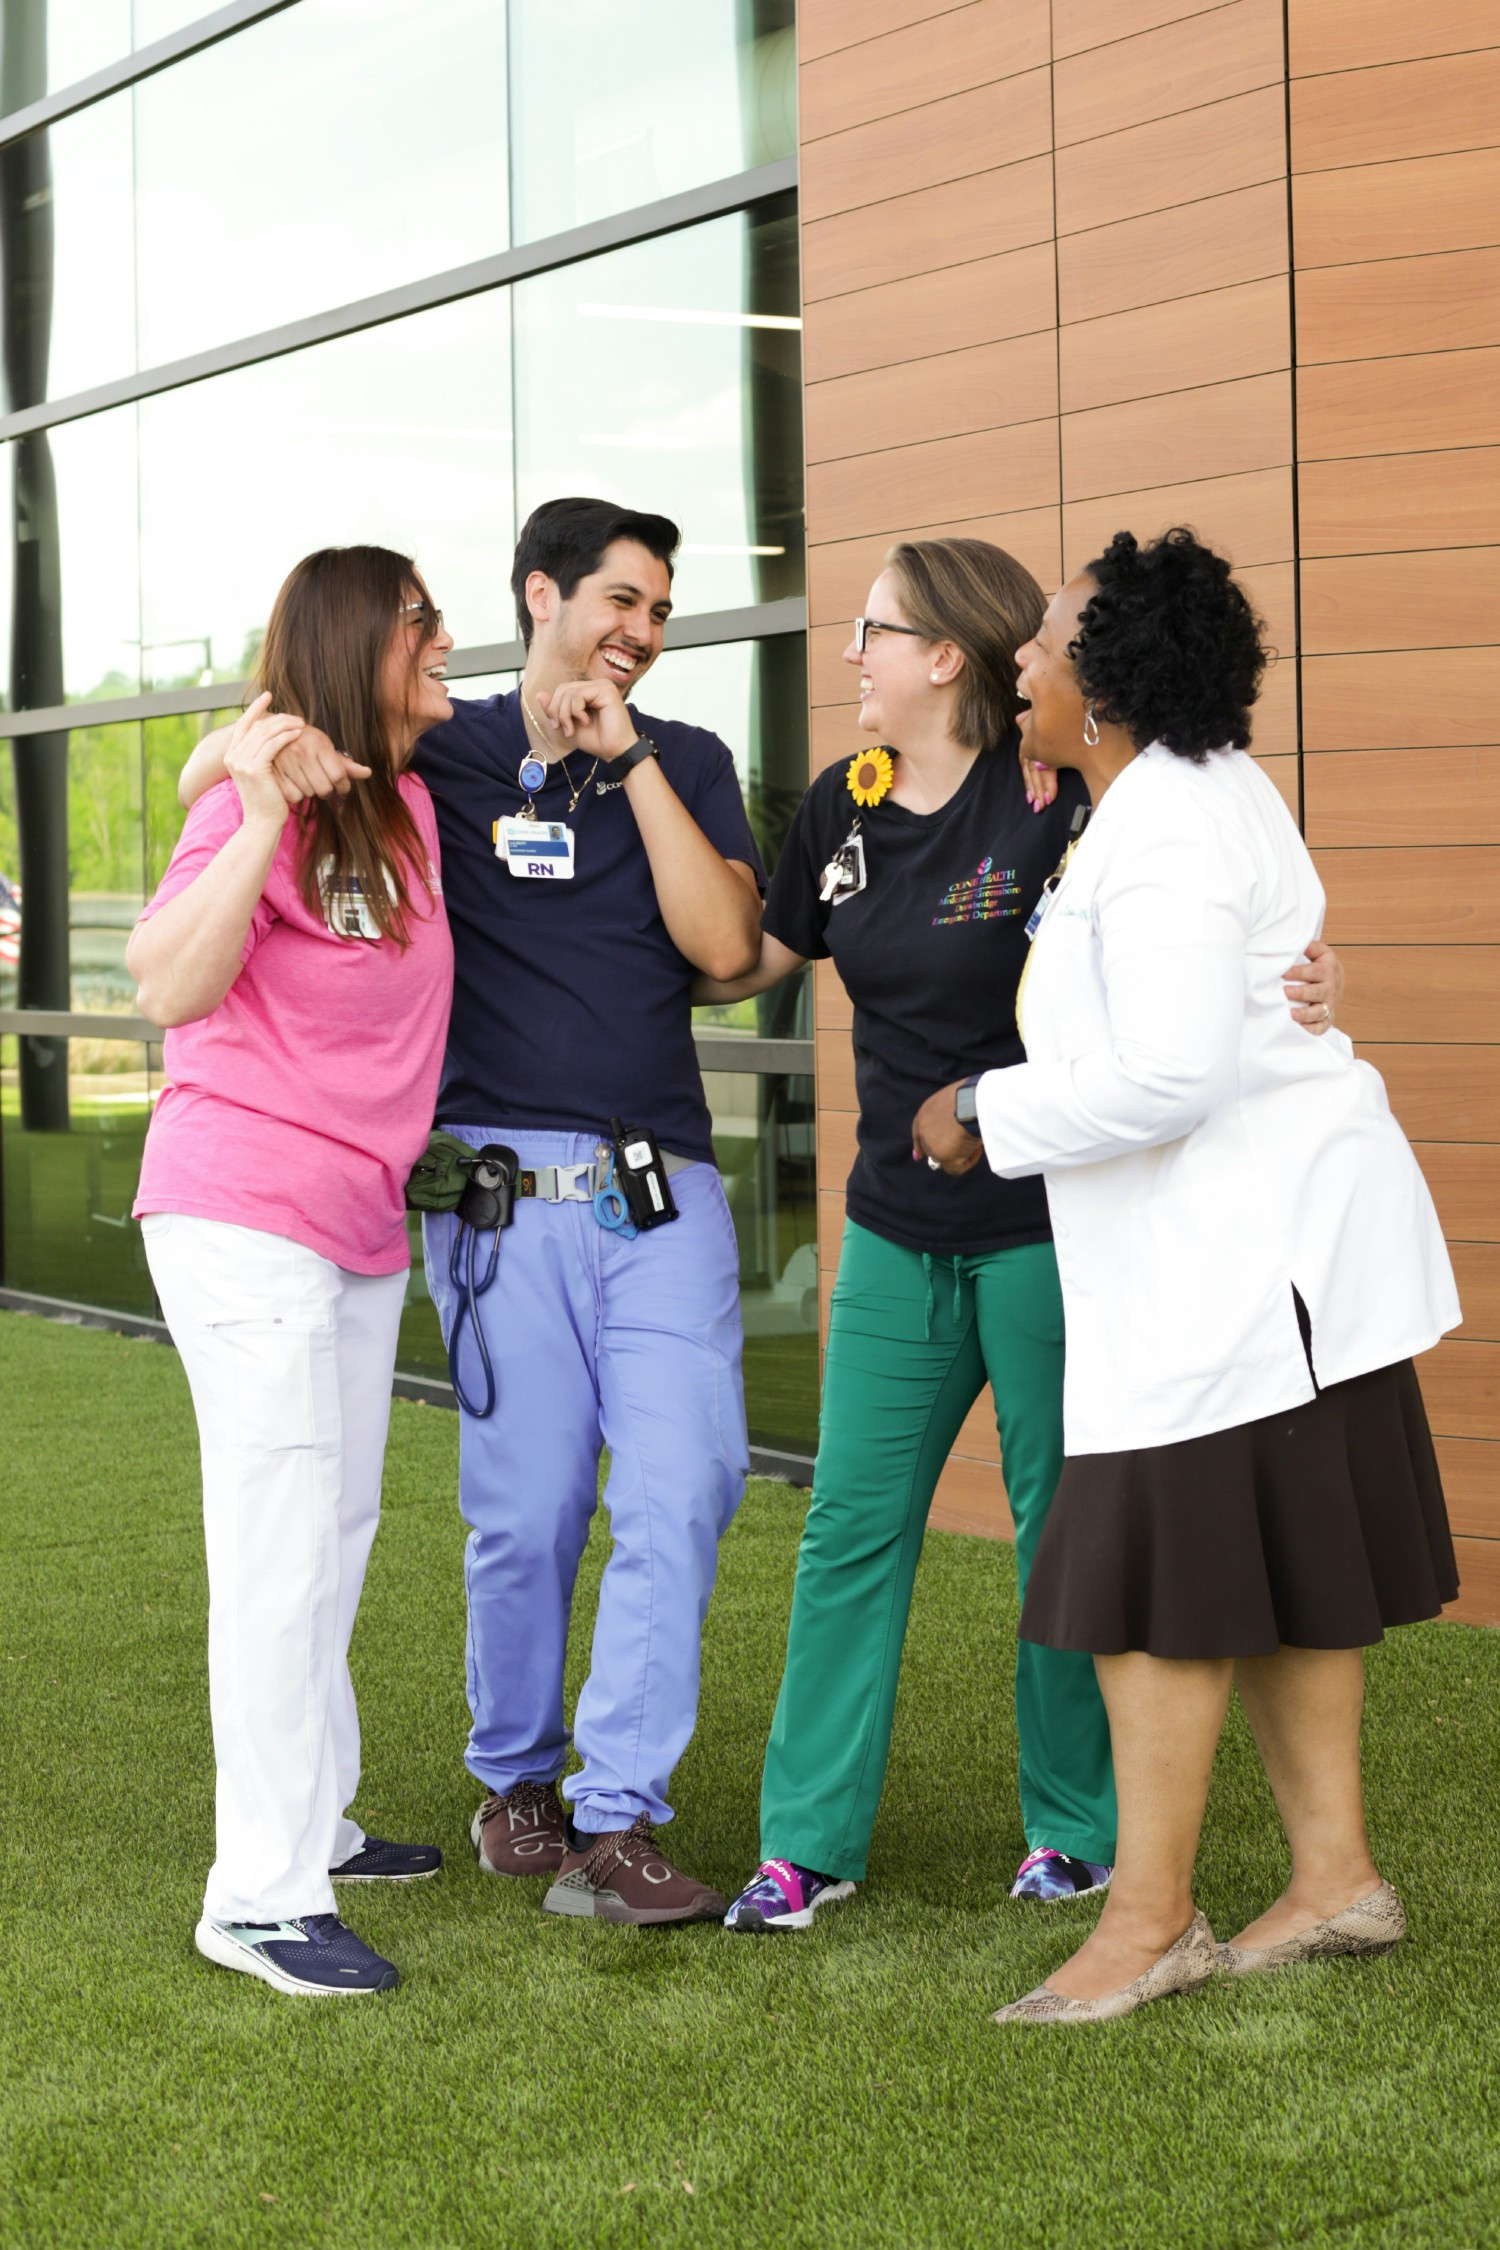 Collaboration and sharing are encouraged in Cone Health's team-oriented environment.